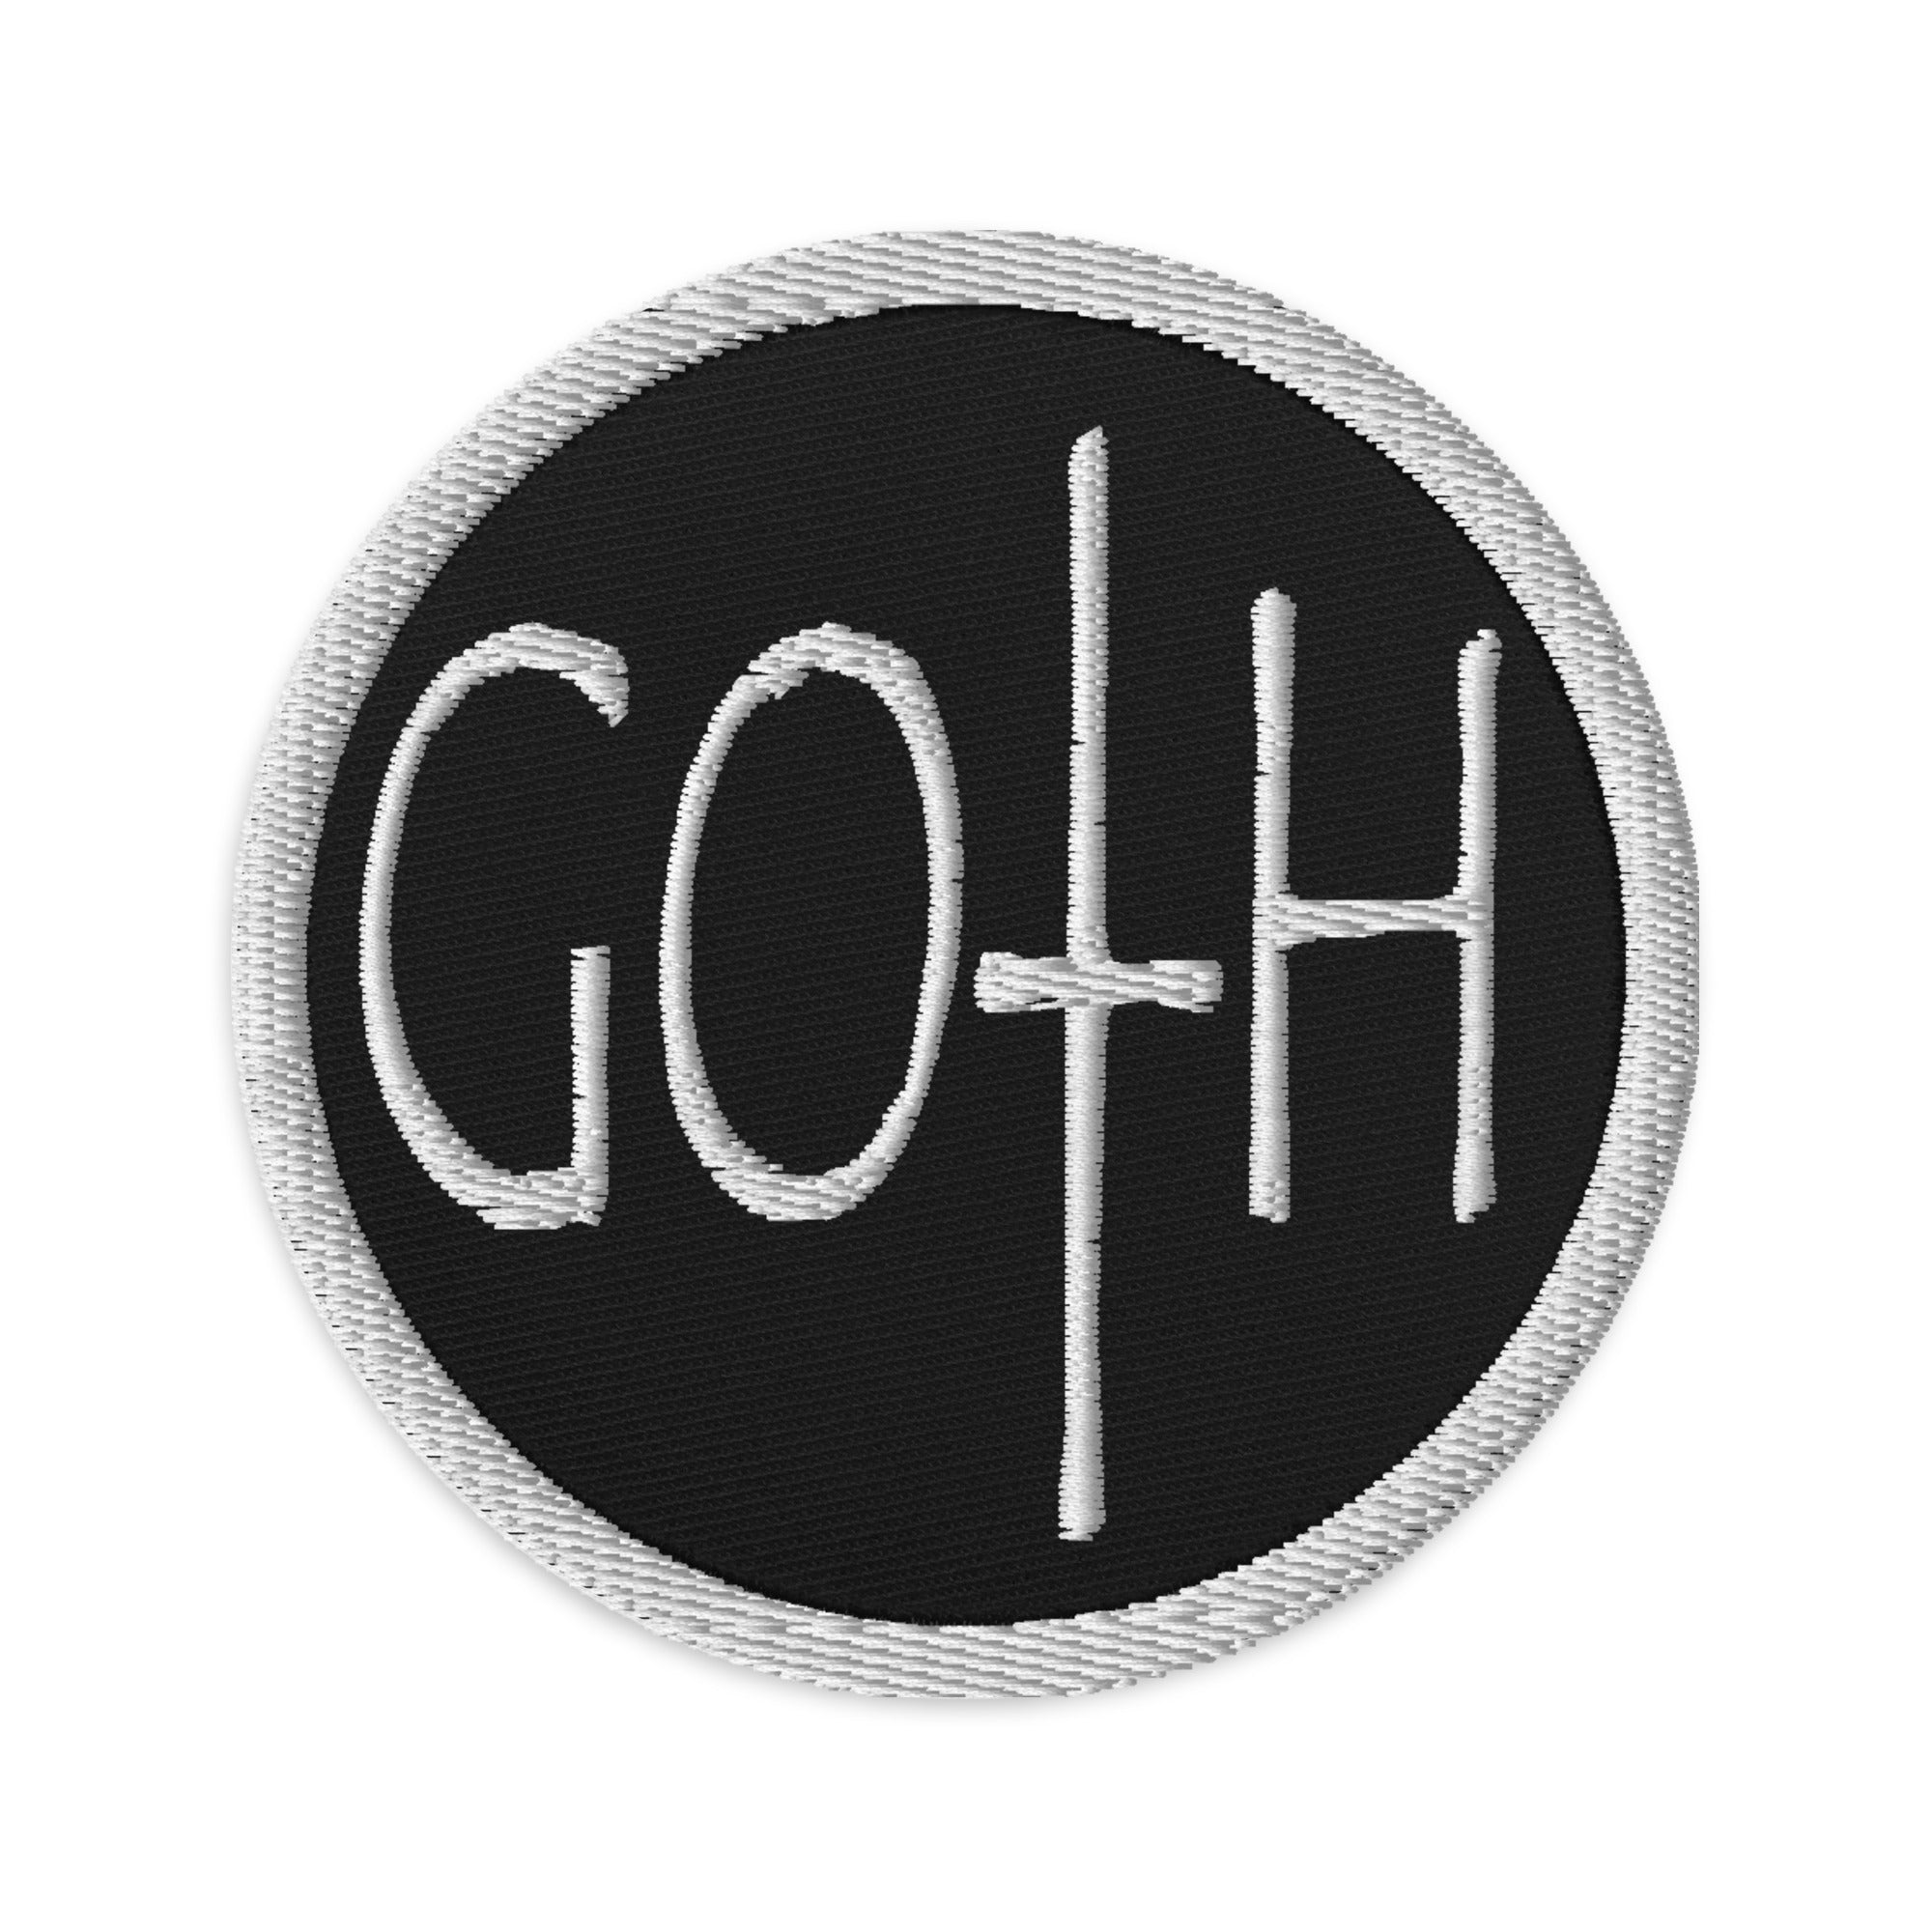 Goth Dark and Morbid Style Halloween Celebration Embroidered Patch White Thread - Edge of Life Designs